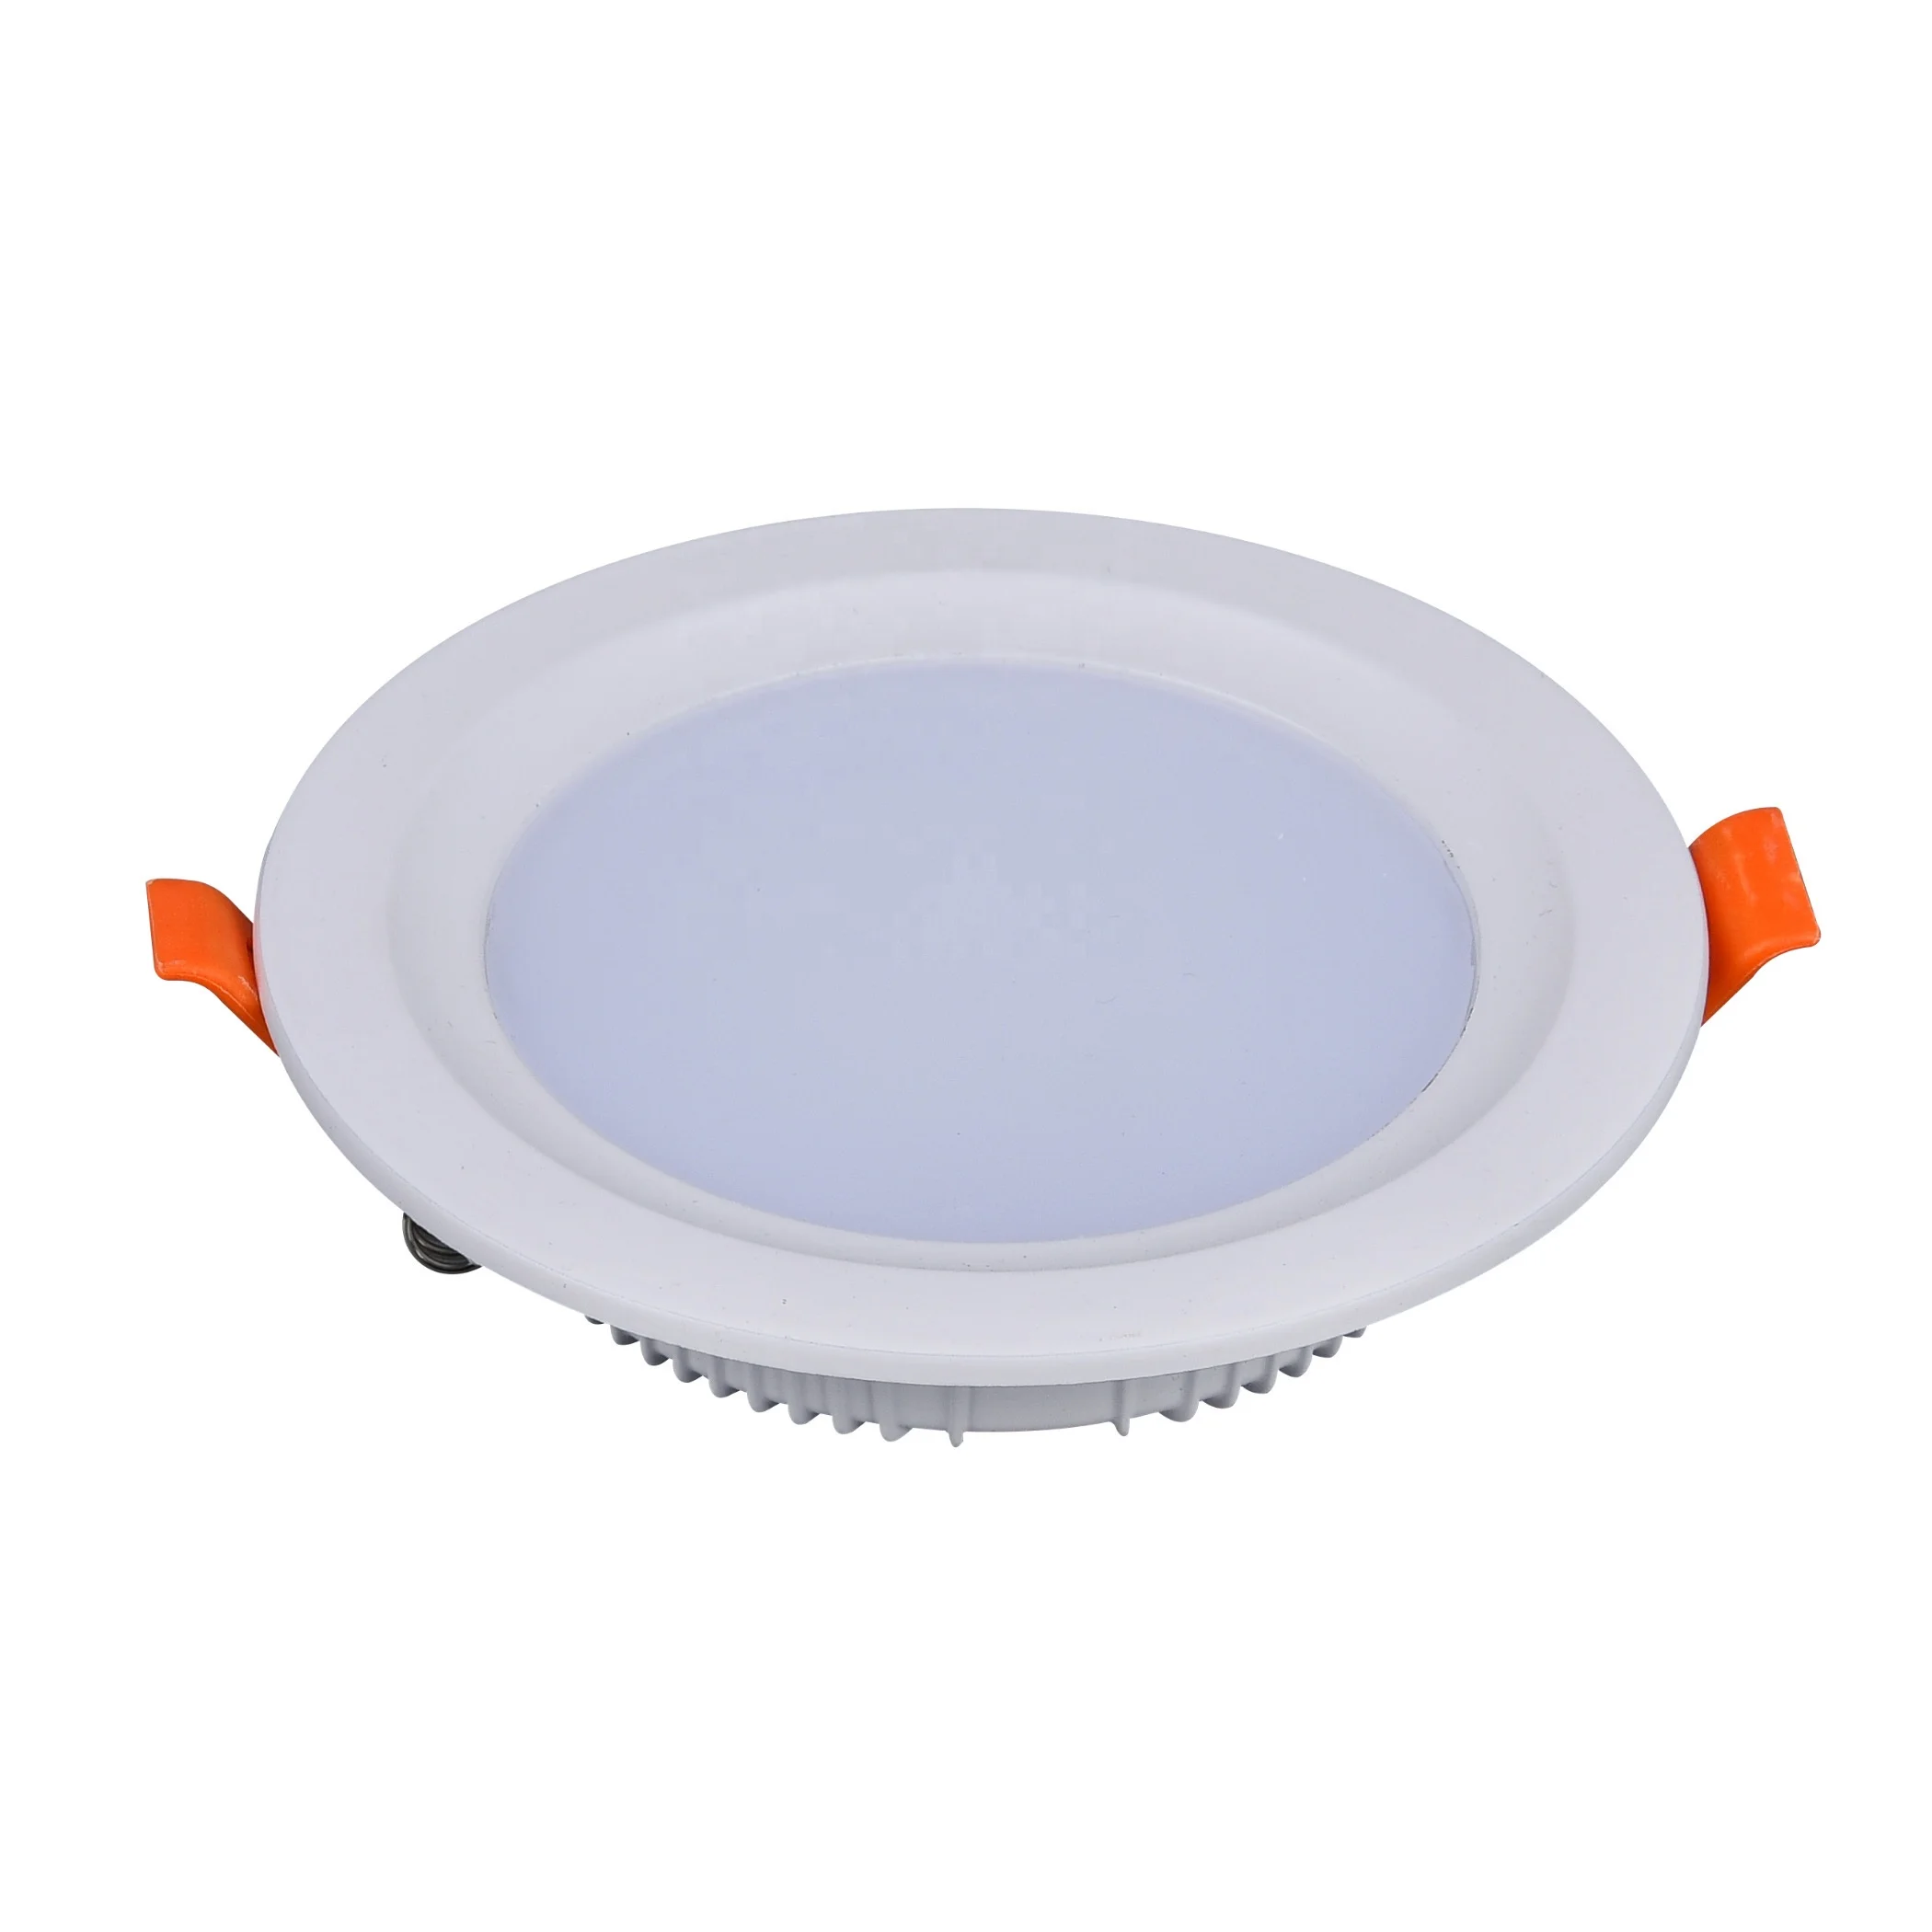 Commercial Lighting Cob Downlight Aluminum Ajustable SMD 5w 7w 10w 16w 24w Recessed LED Down Light for Home warranty 3 years